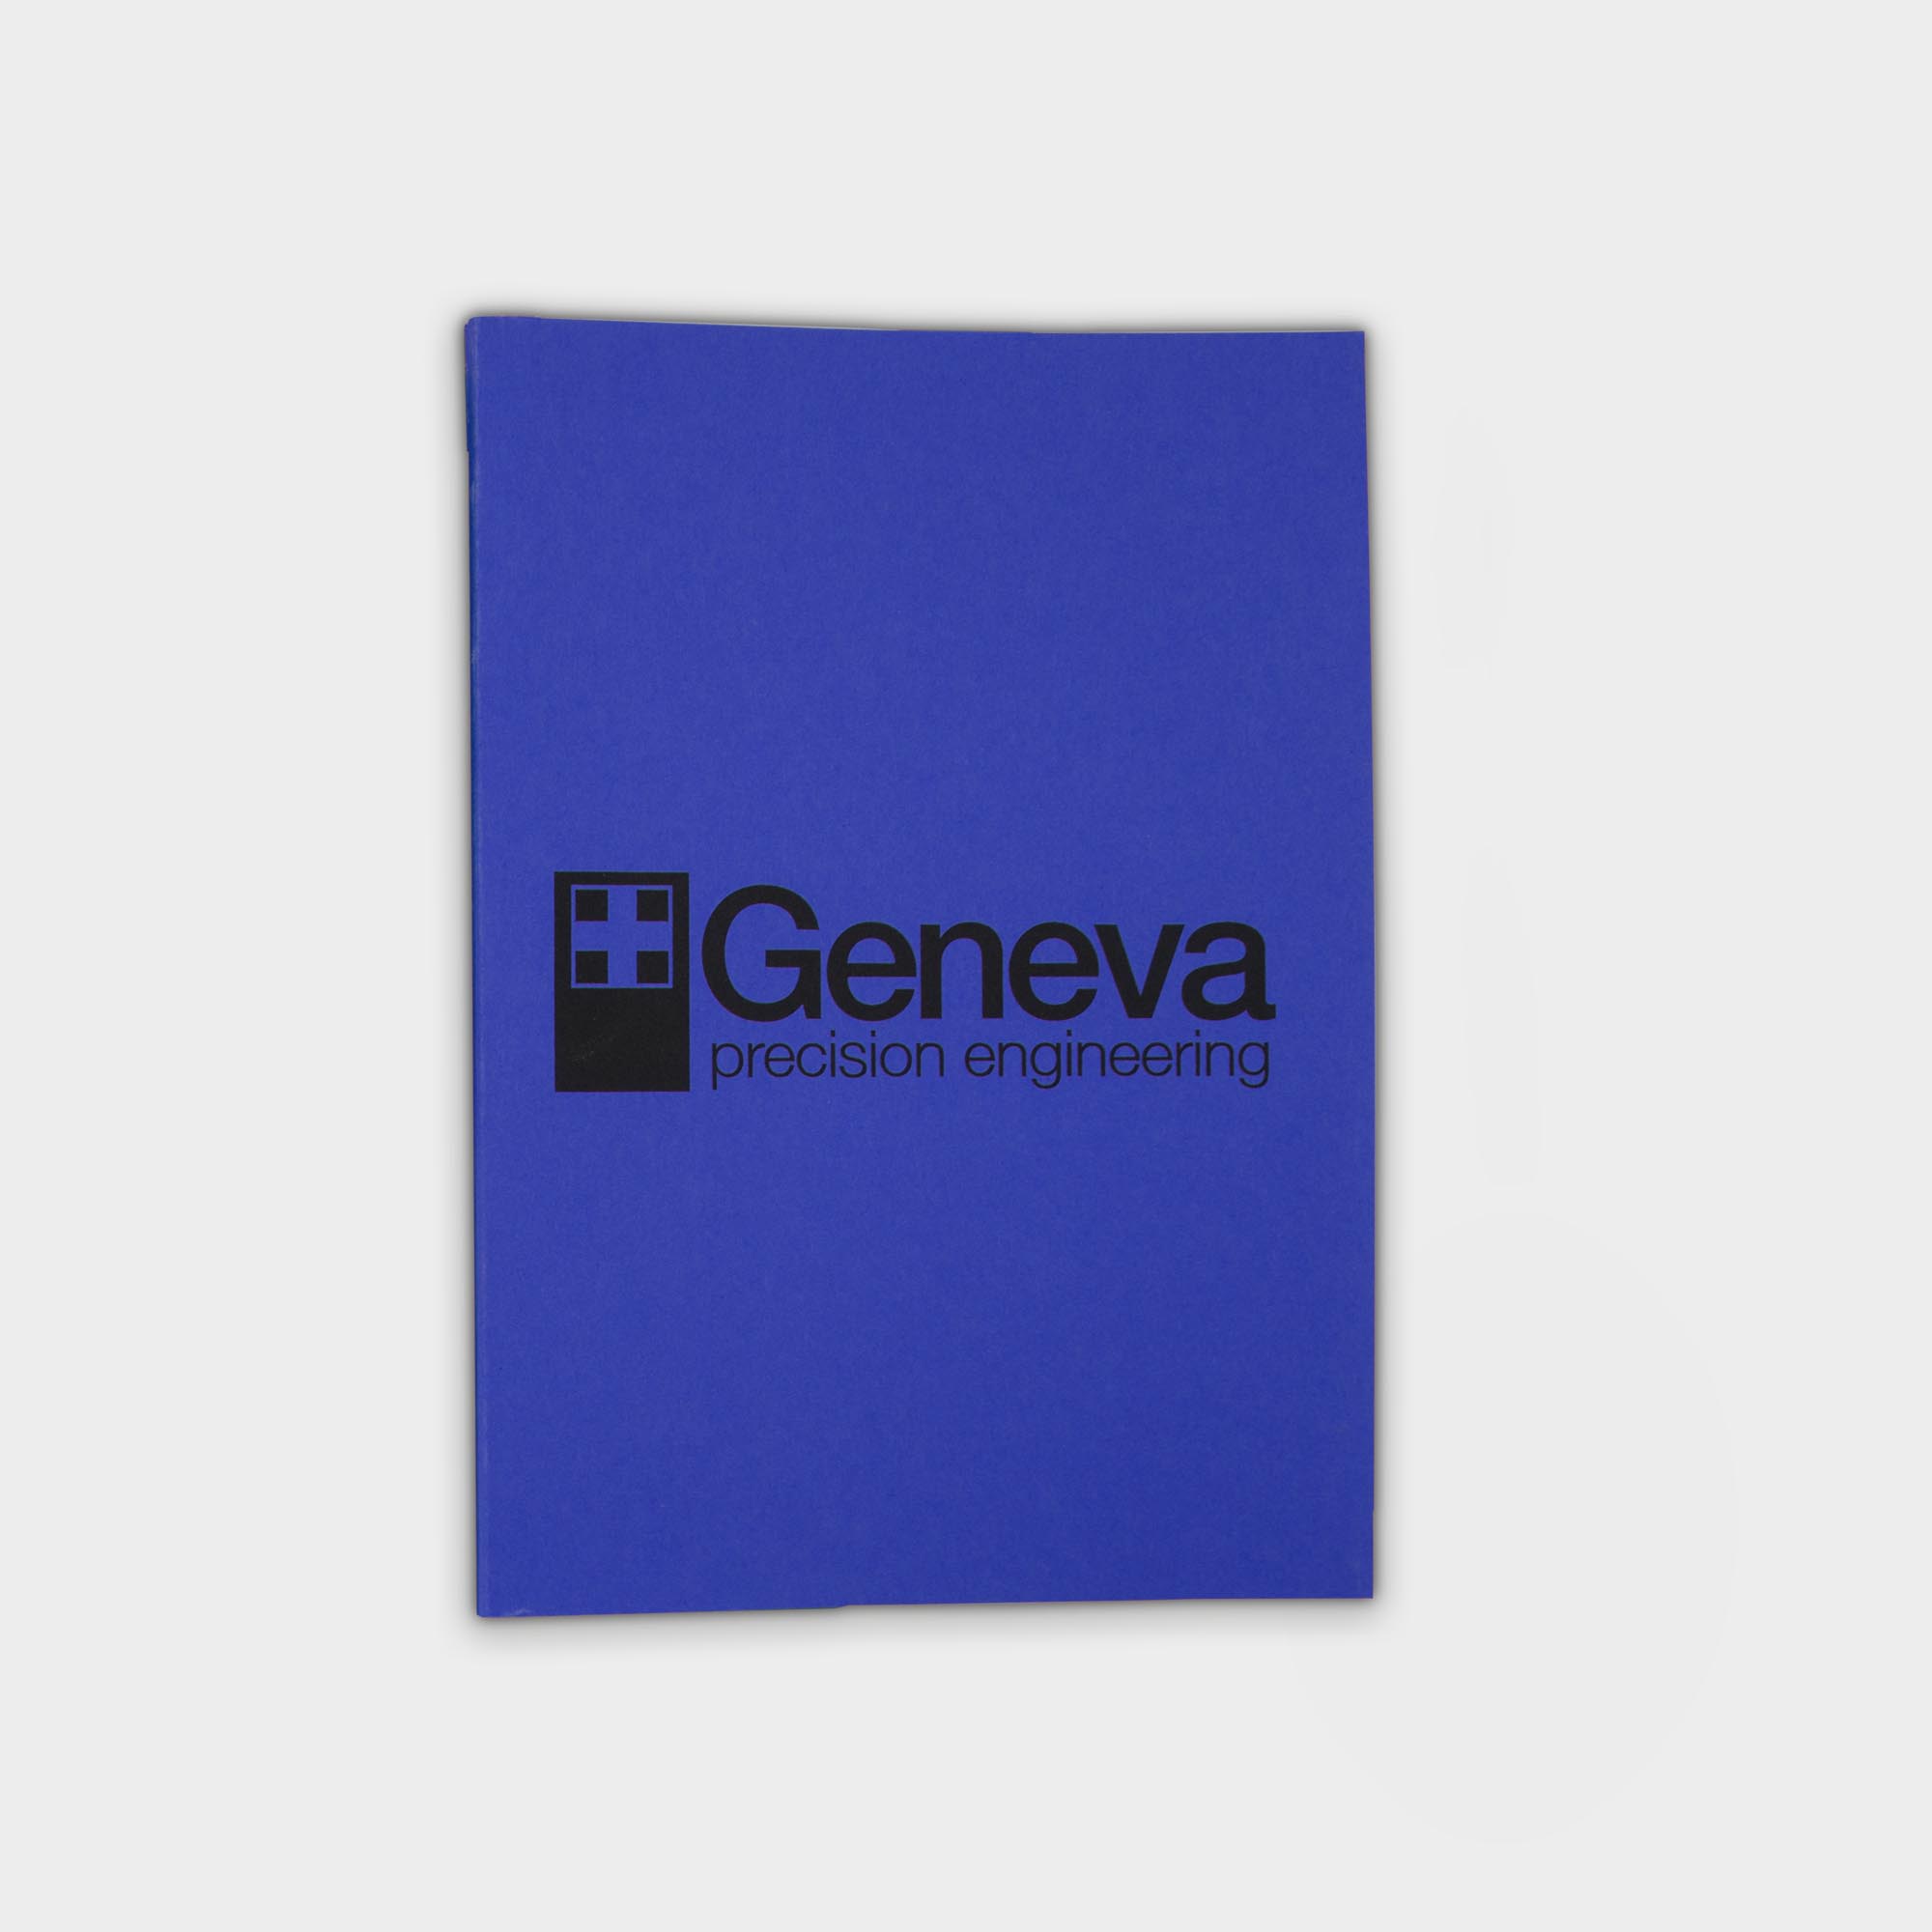 The Green & Good A5 Perfect Bound Notebook made from recycled till receipts. 170gsm recycled coloured cover with 50 sheets of white 80gsm recycled paper. Plain paper content as standard. Lined and squared paper are optional. Blue